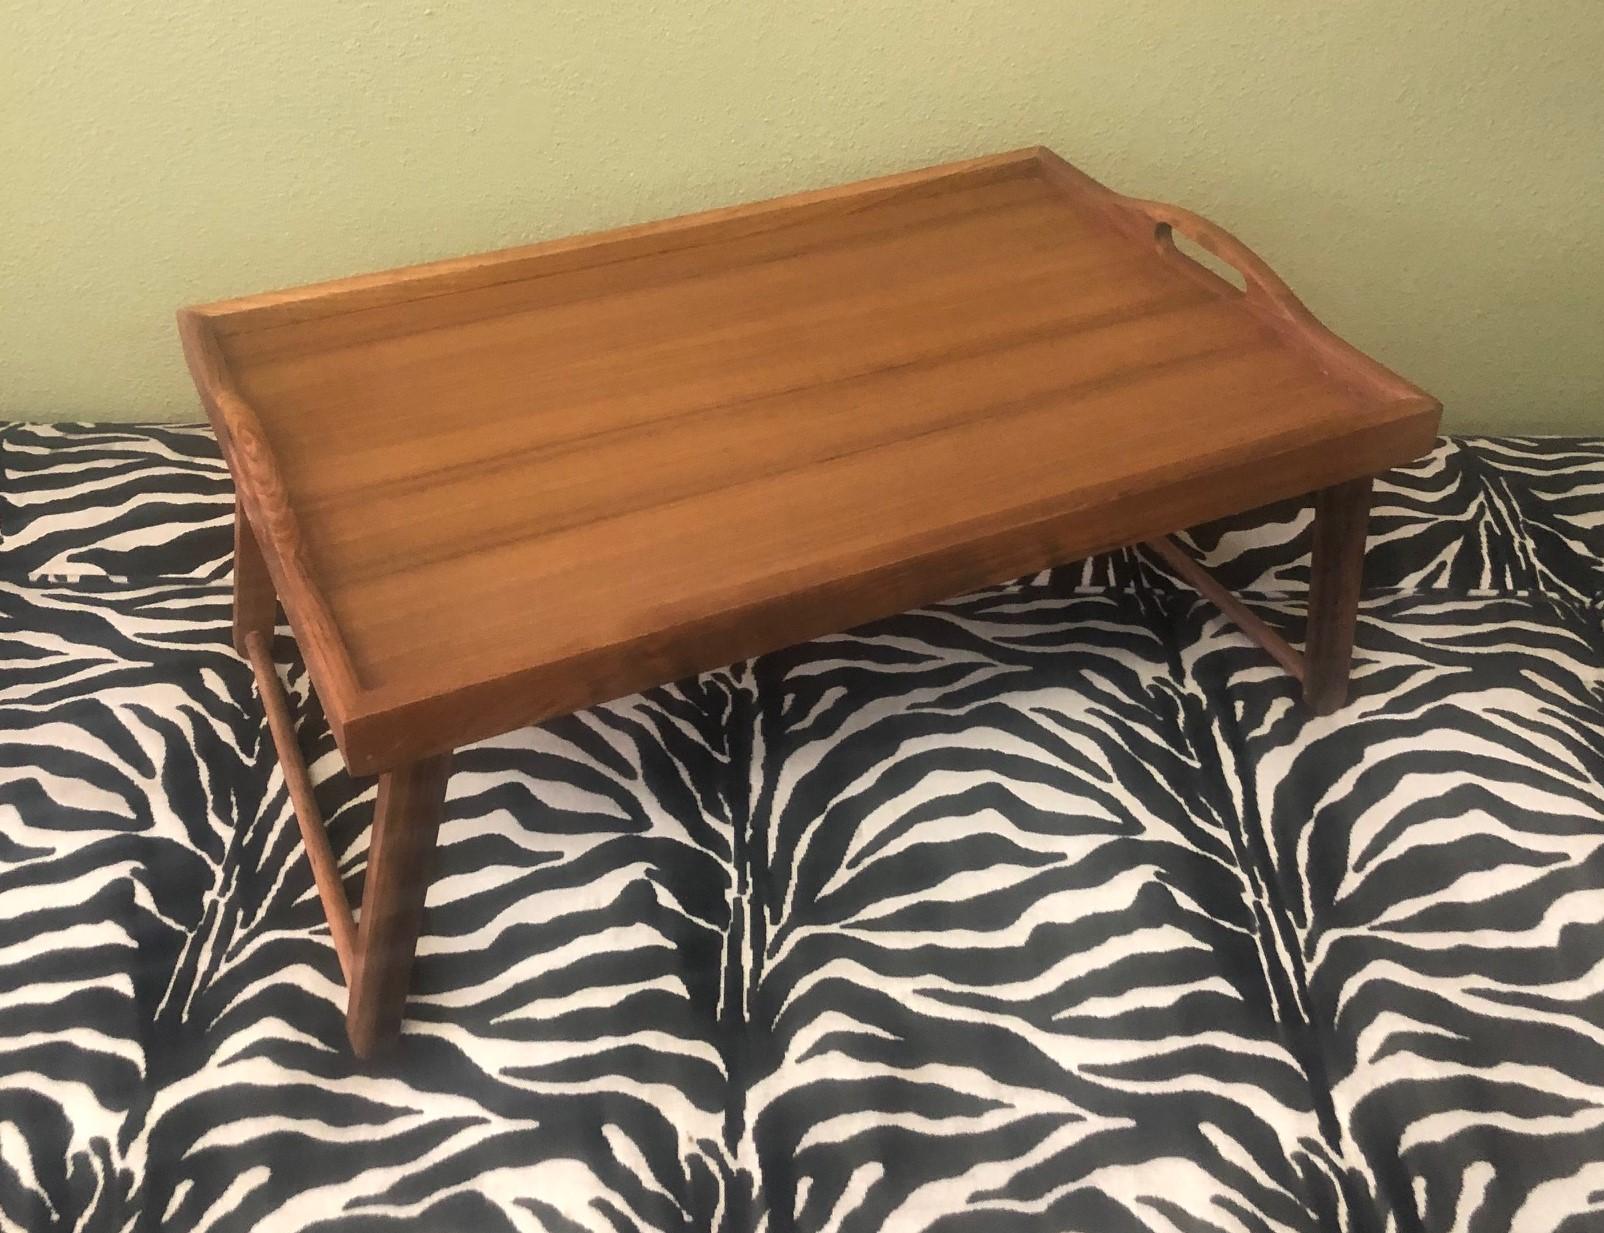 Mid-Century Modern teak foldable bed / breakfast tray, circa 1970s. Can be used for breakfast in bed with the two foldable legs down or as a regular serving tray with the legs in the up position. The piece measures 15.5